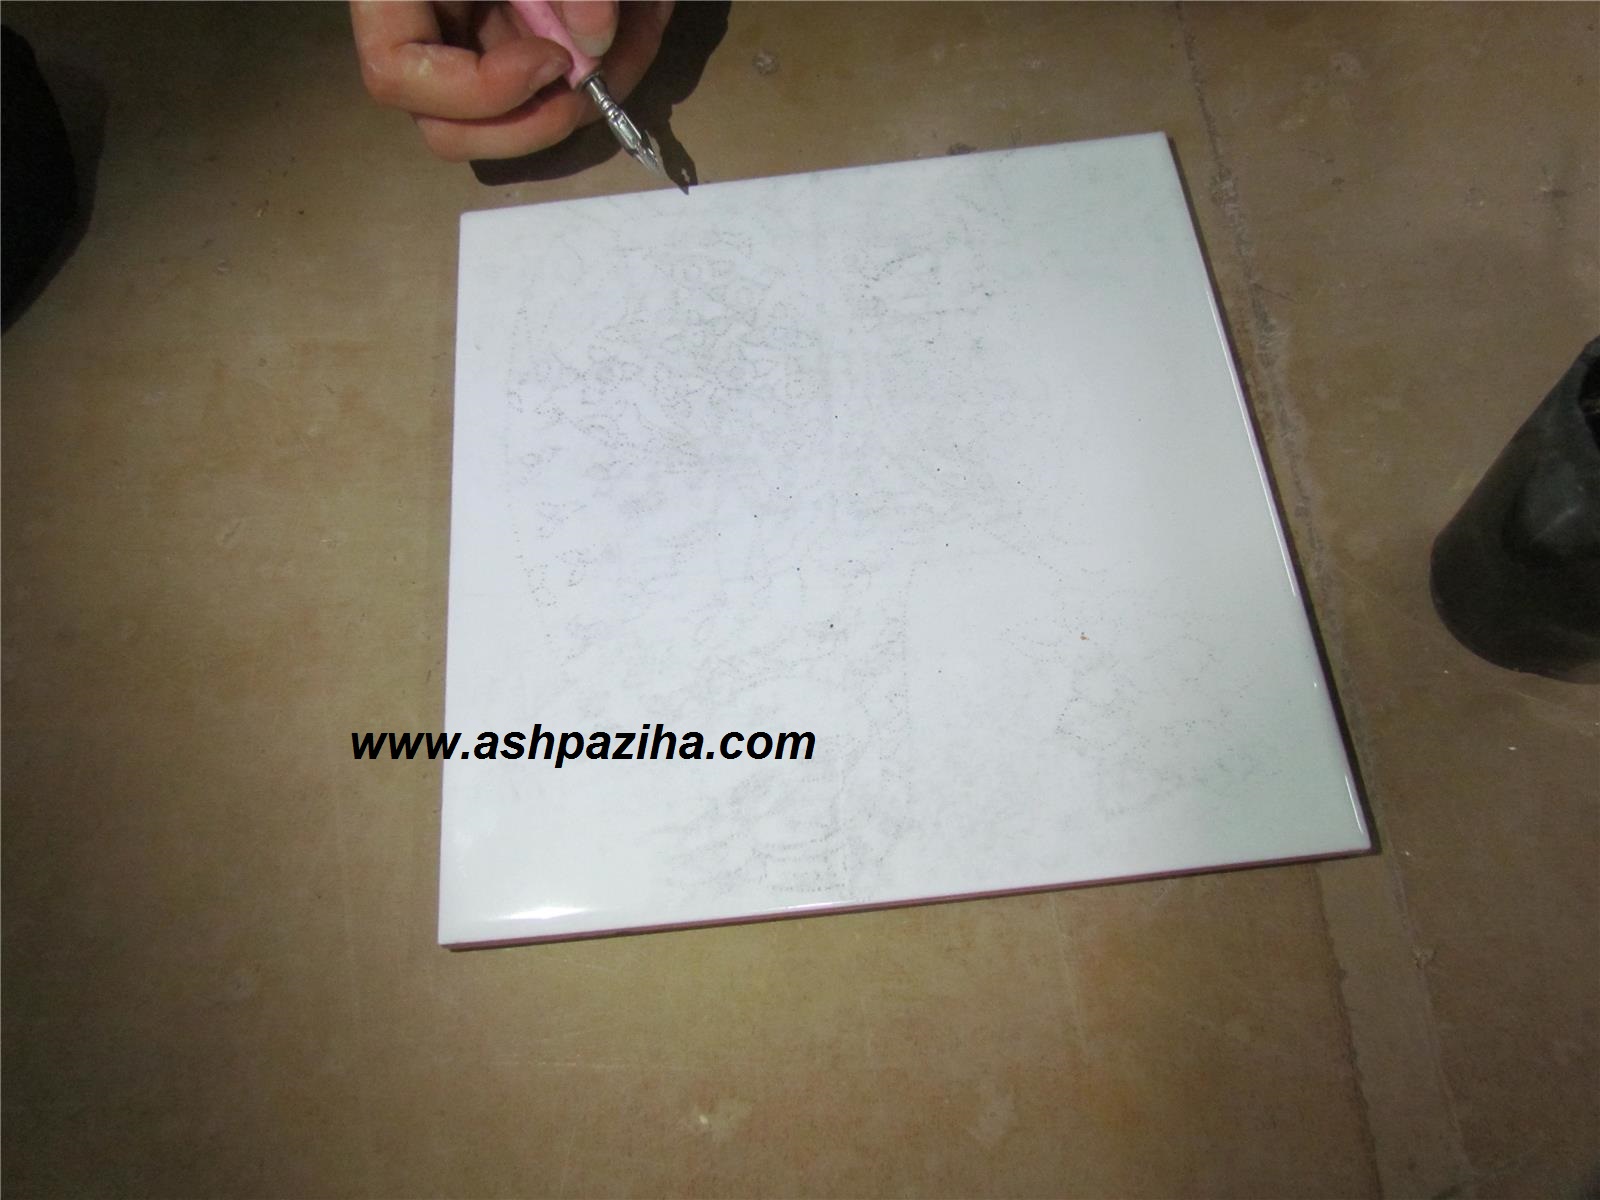 Educational - painting - and - designing - the - Tiles (9)